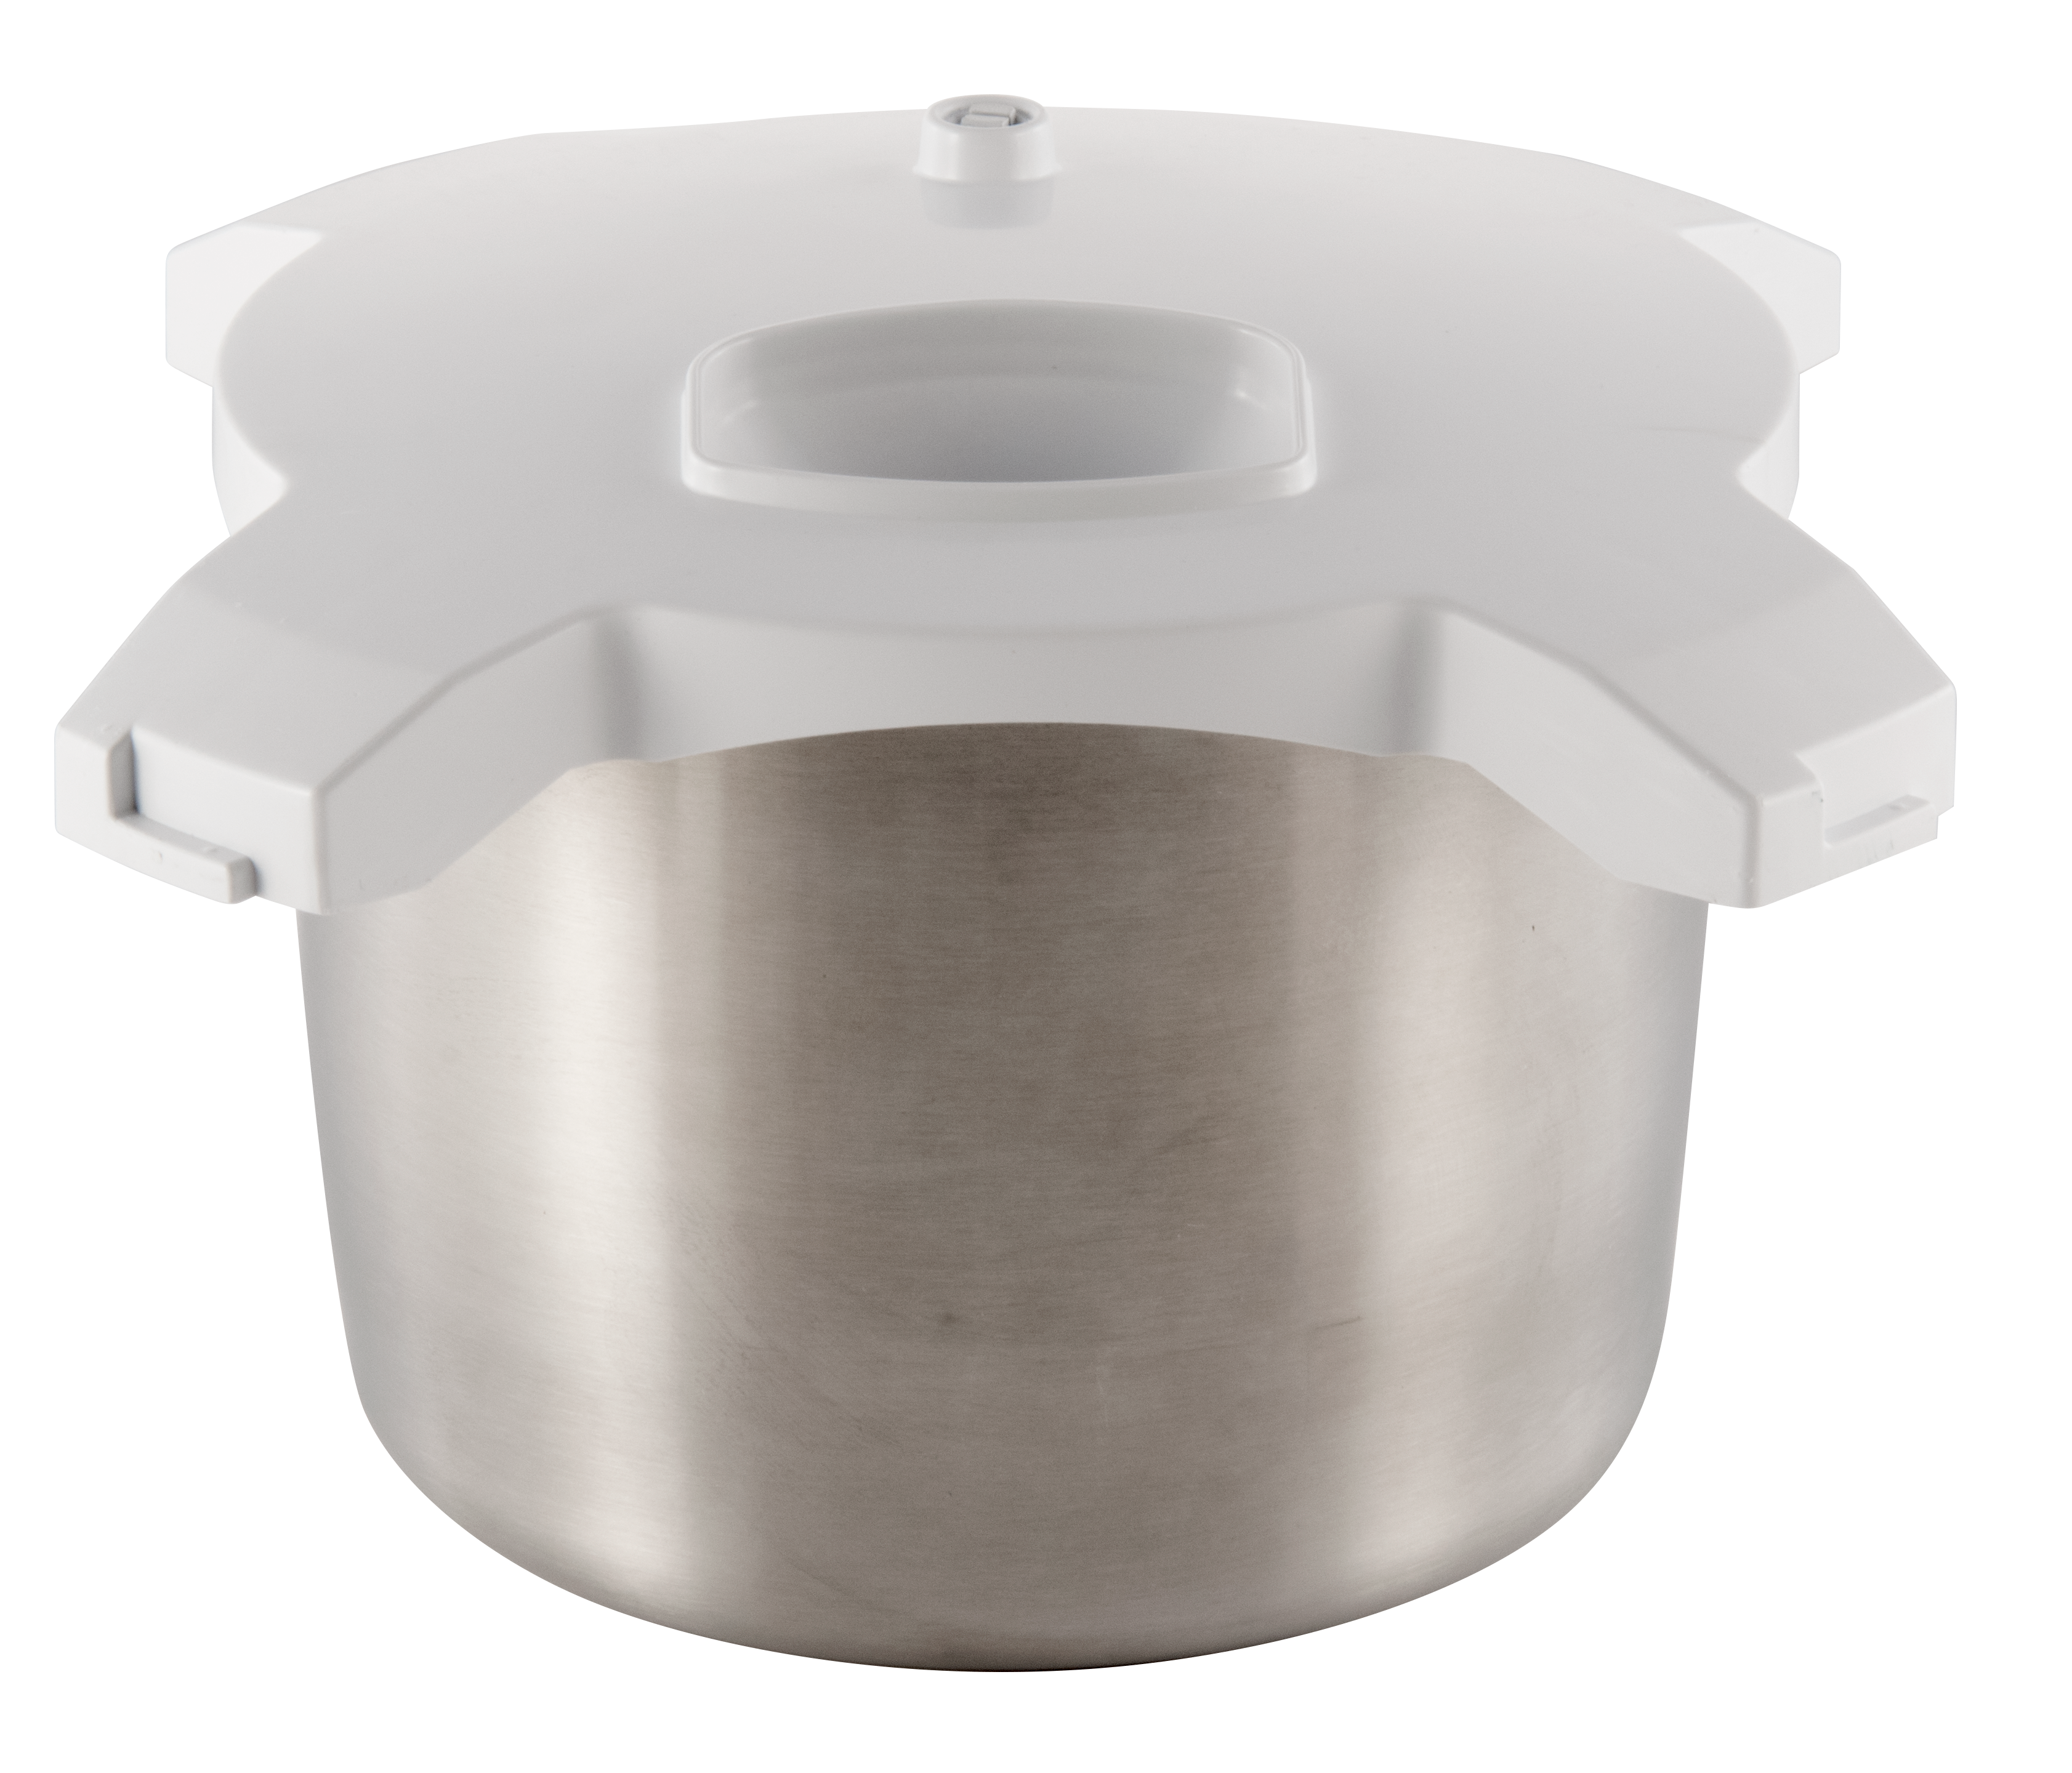 Flake Mill Attachment for Bosch Universal Mixer - Spoil the Cook